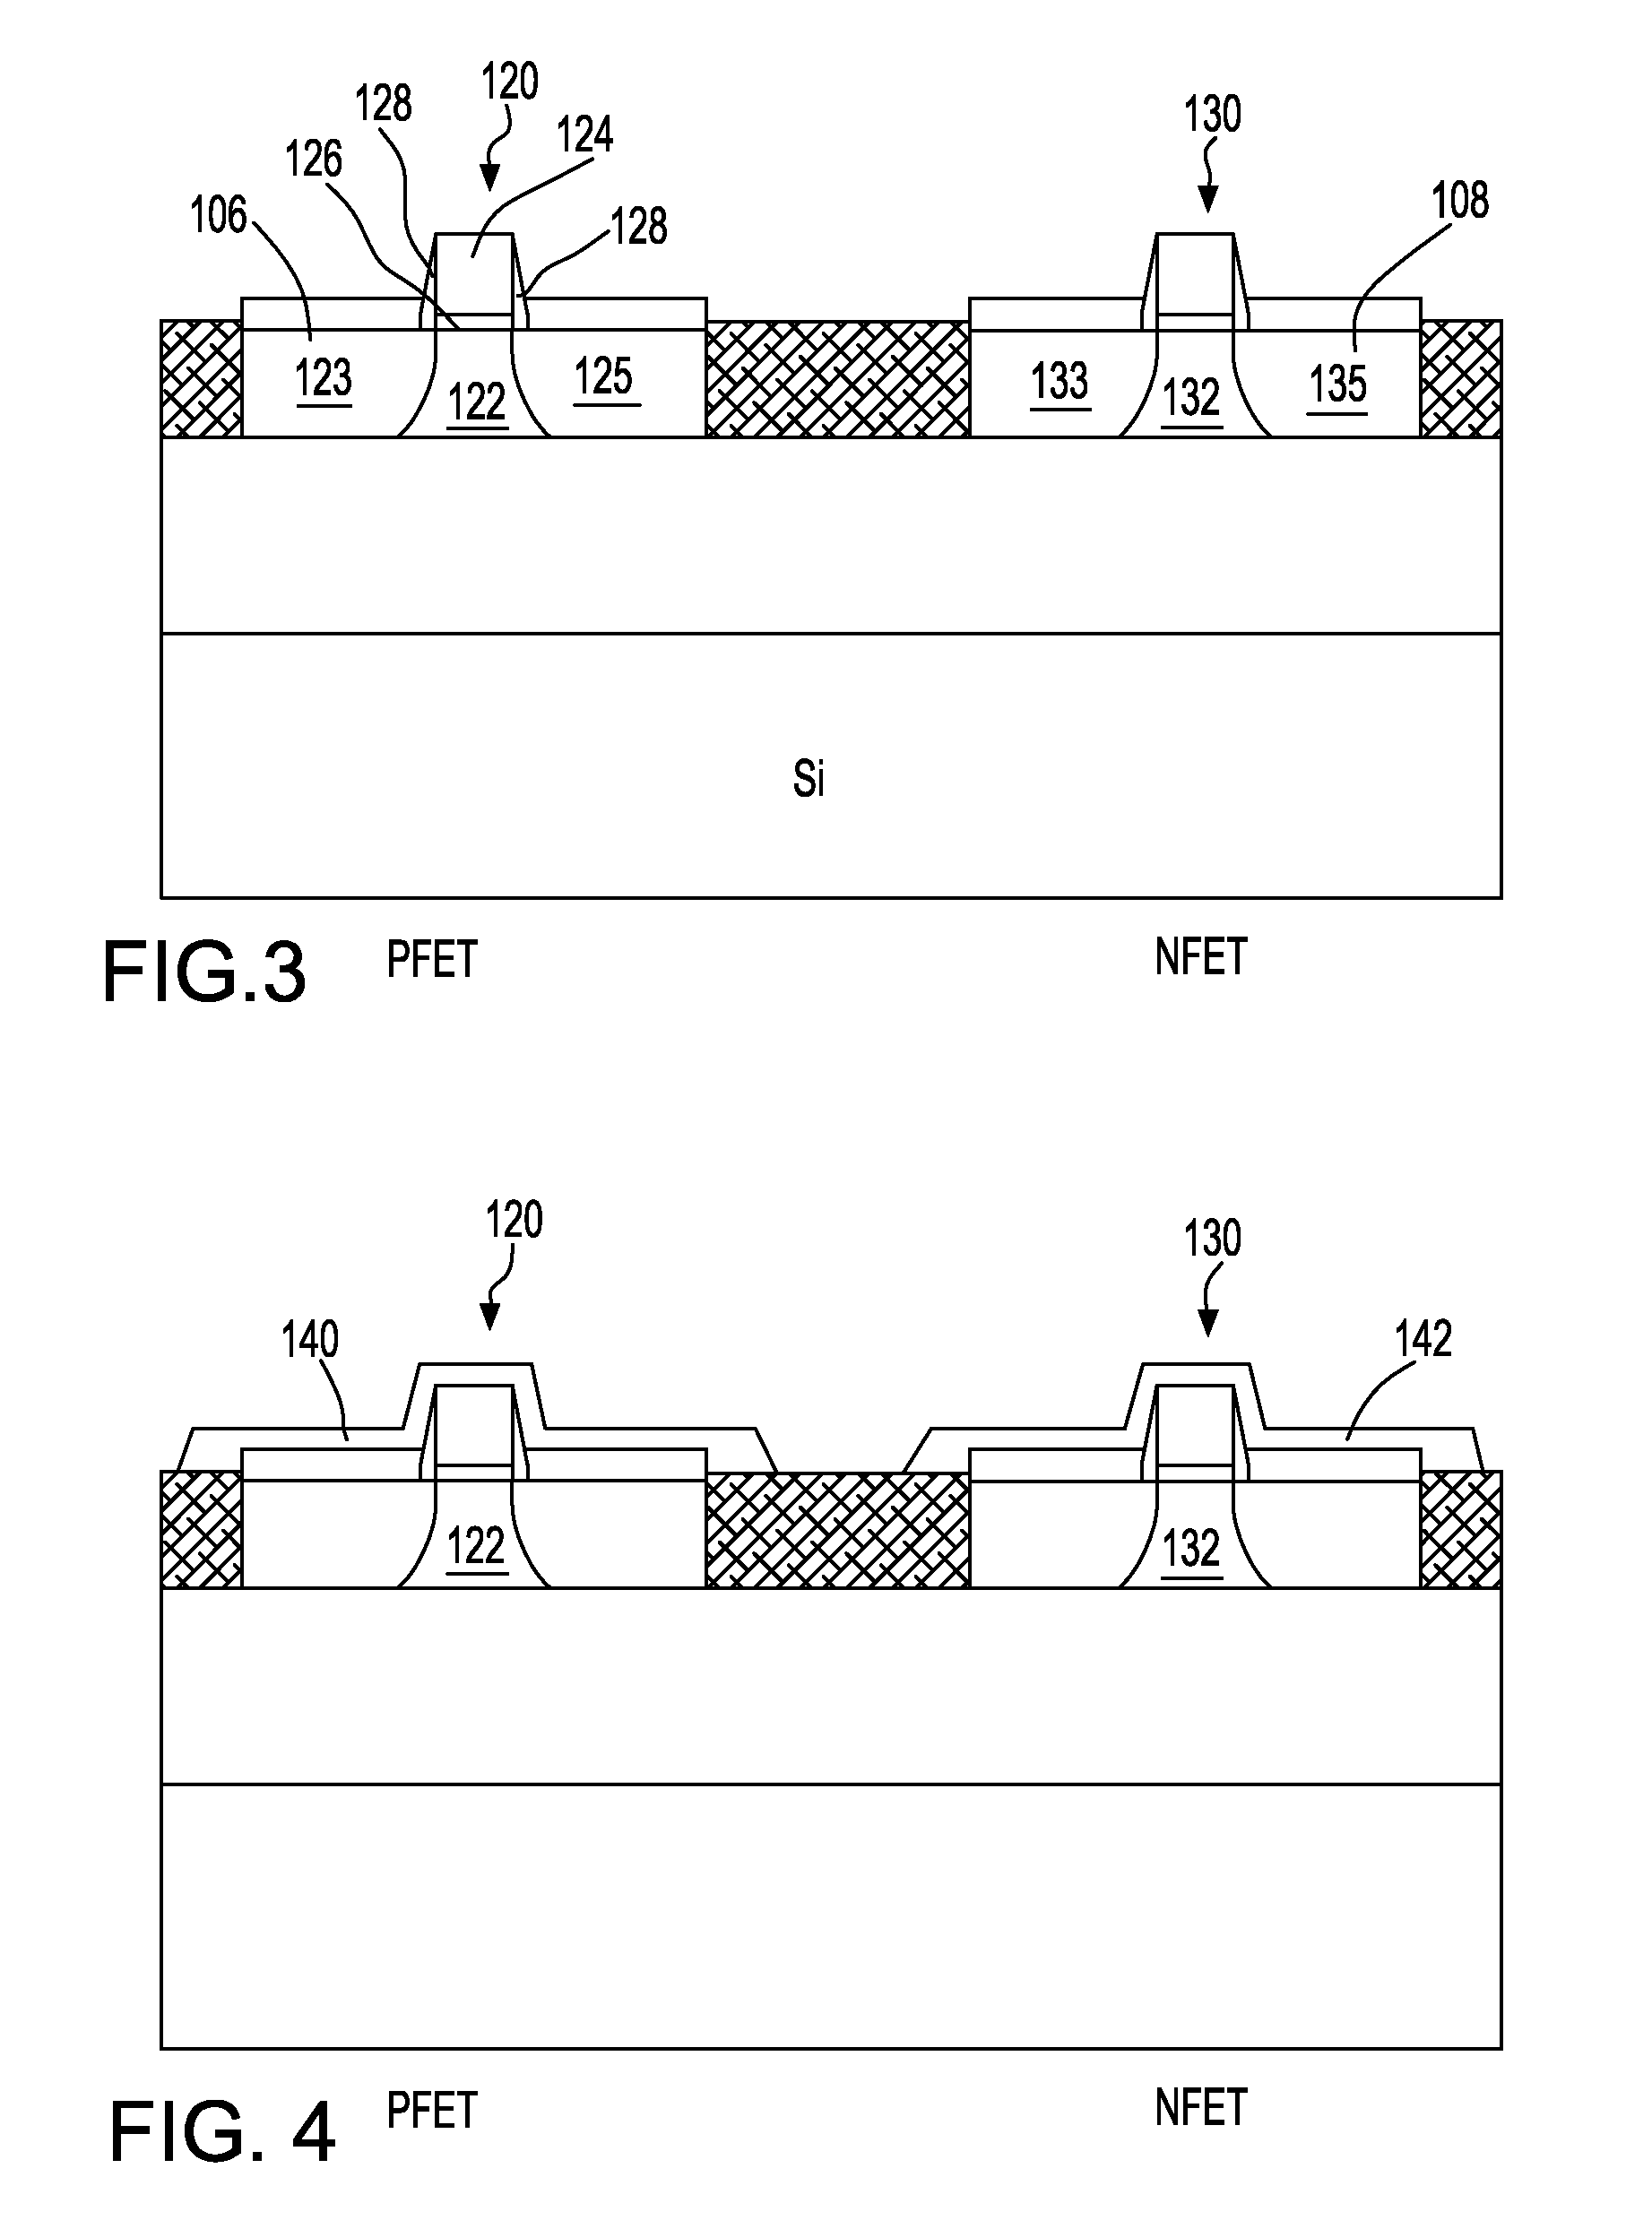 Method of forming stressed SOI FET having doped glass box layer using sacrificial stressed layer